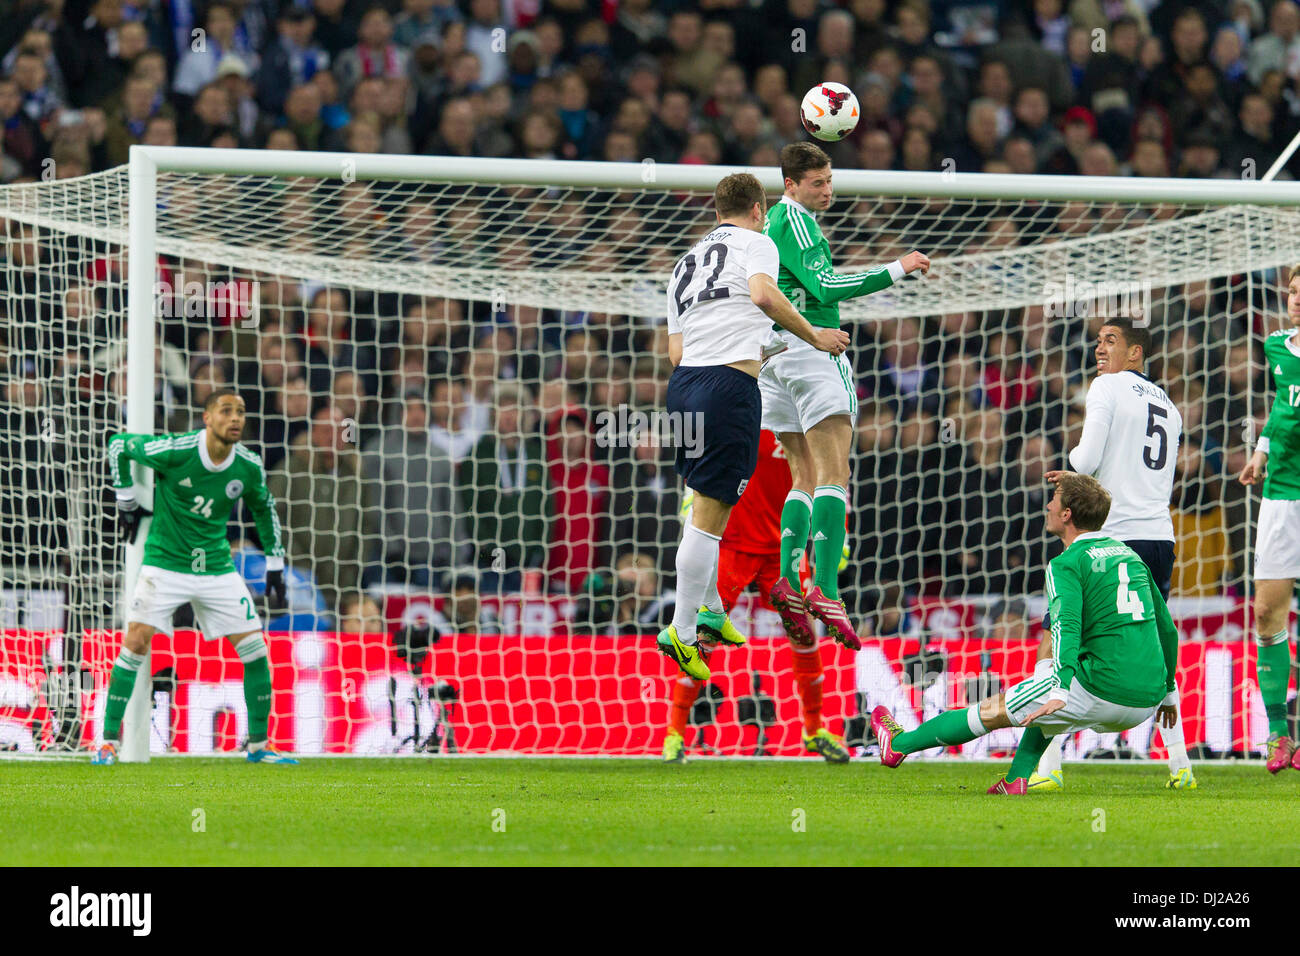 i19.11.2013 London, England. Germany's Julian DRAXLER wins a header under pressure from England's Rickie LAMBERT in his own penalty box during the International football friendly game between England and Germany from Wembley Stadium. Stock Photo